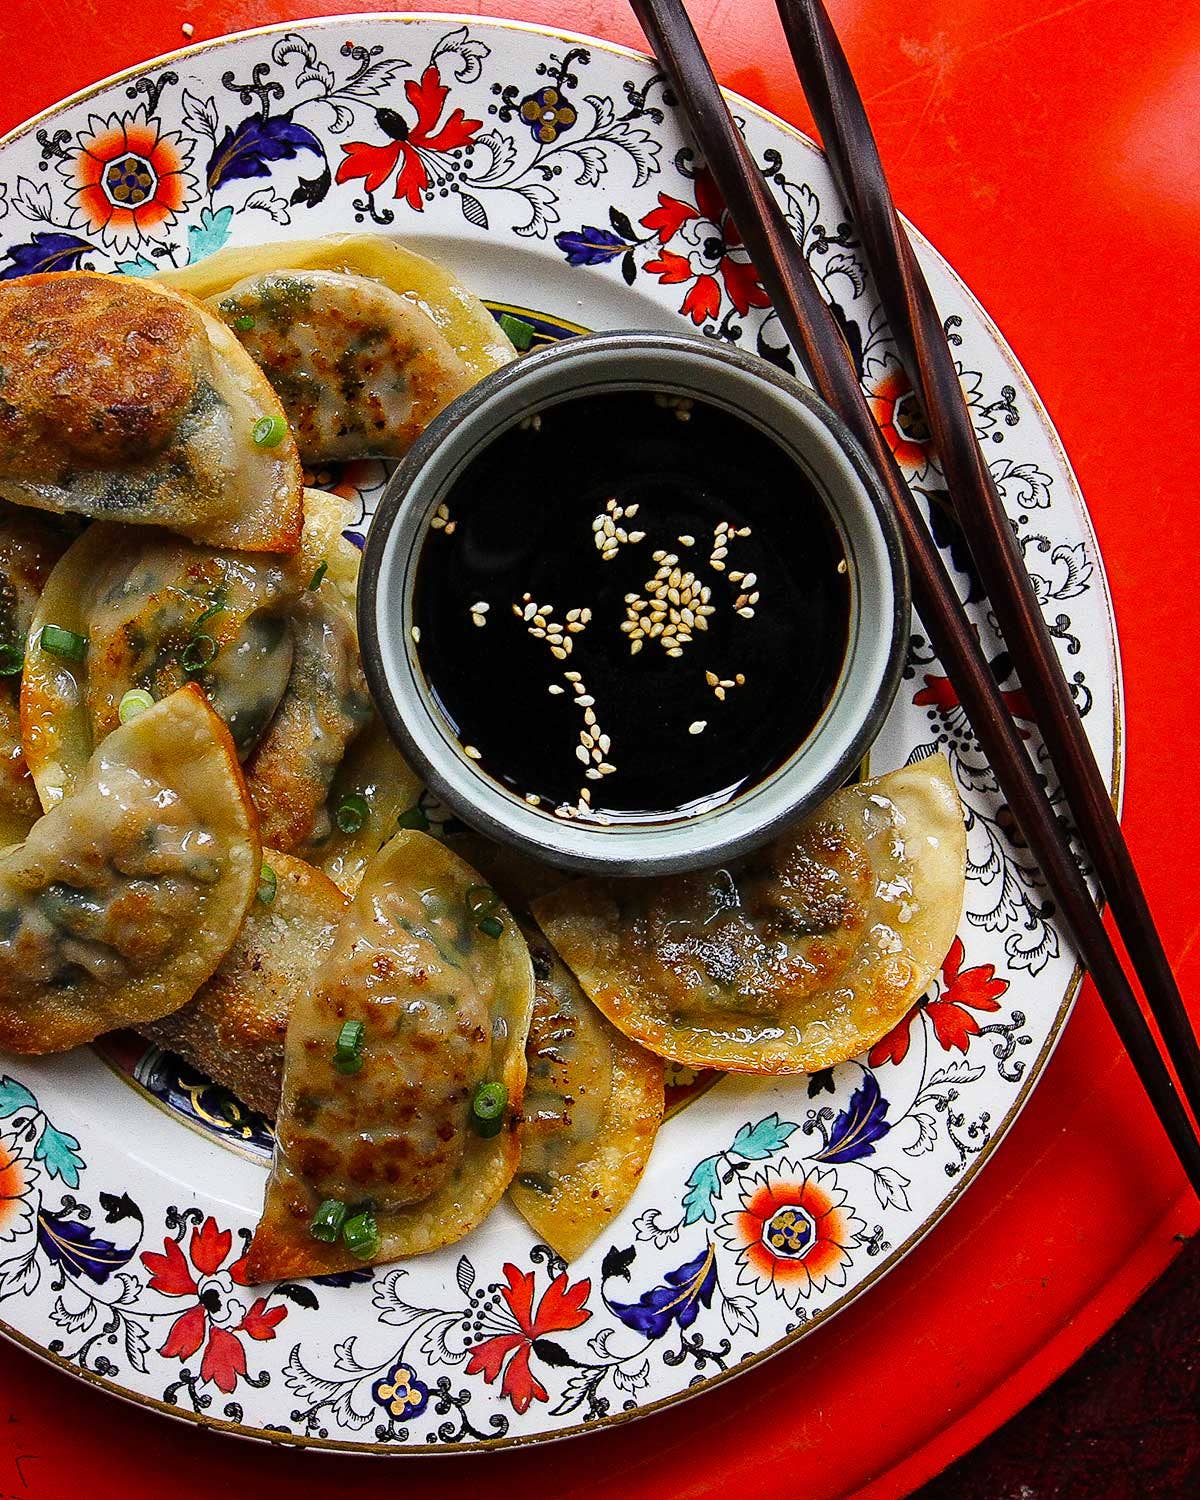 Pork and Cabbage potstickers